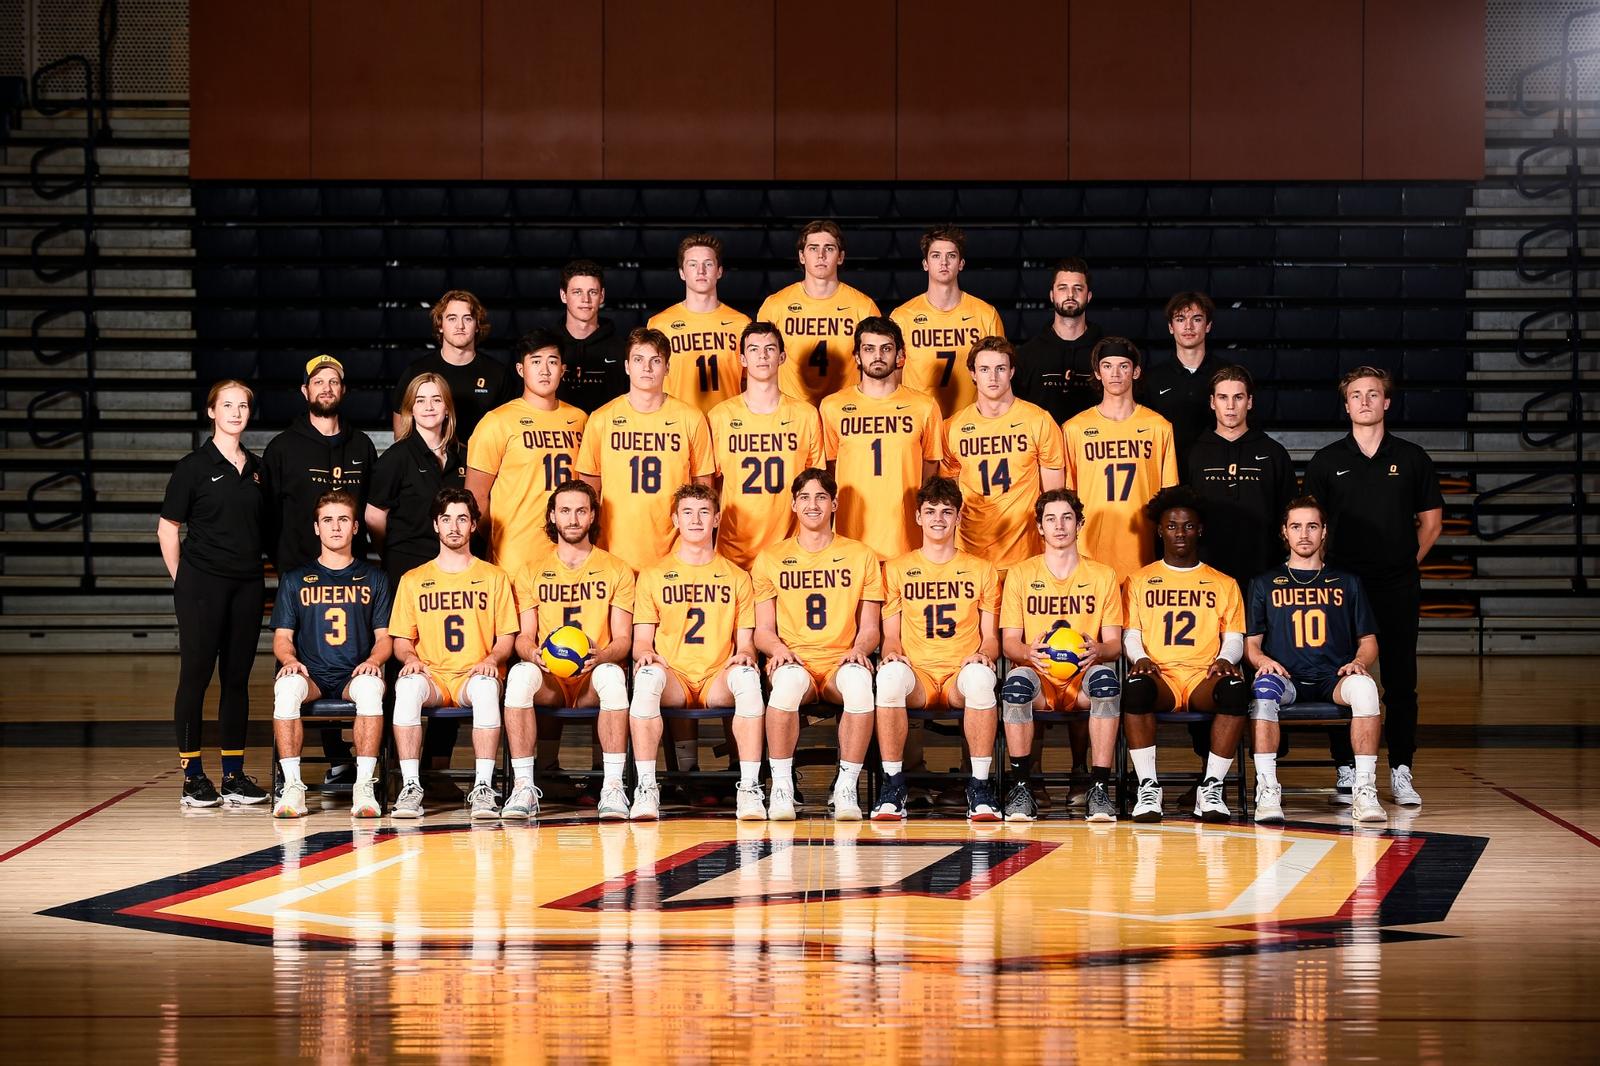 Men's Volleyball Booster image